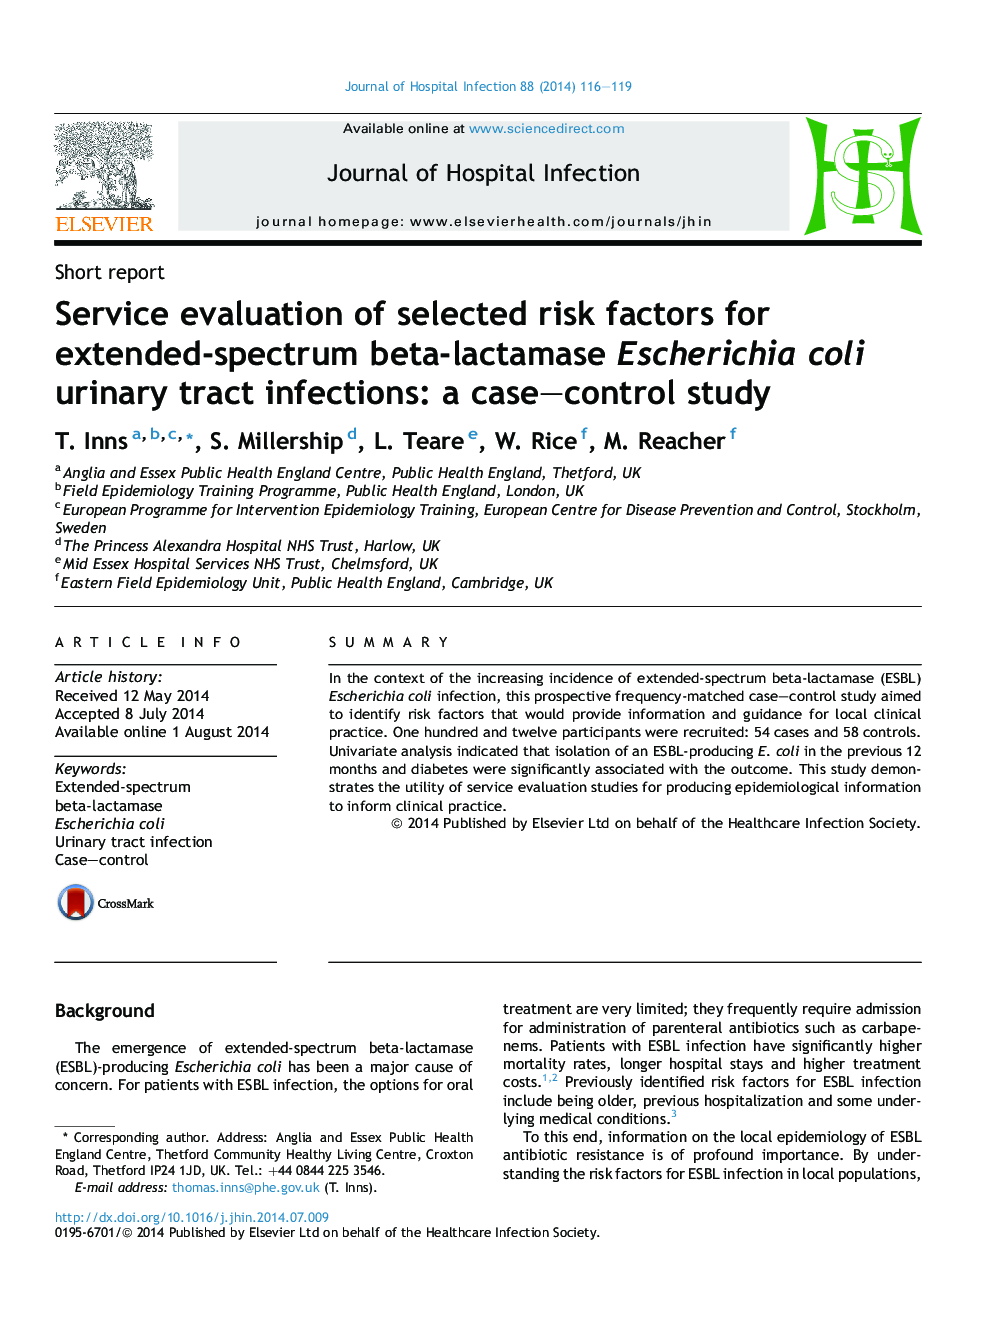 Service evaluation of selected risk factors for extended-spectrum beta-lactamase Escherichia coli urinary tract infections: a case–control study